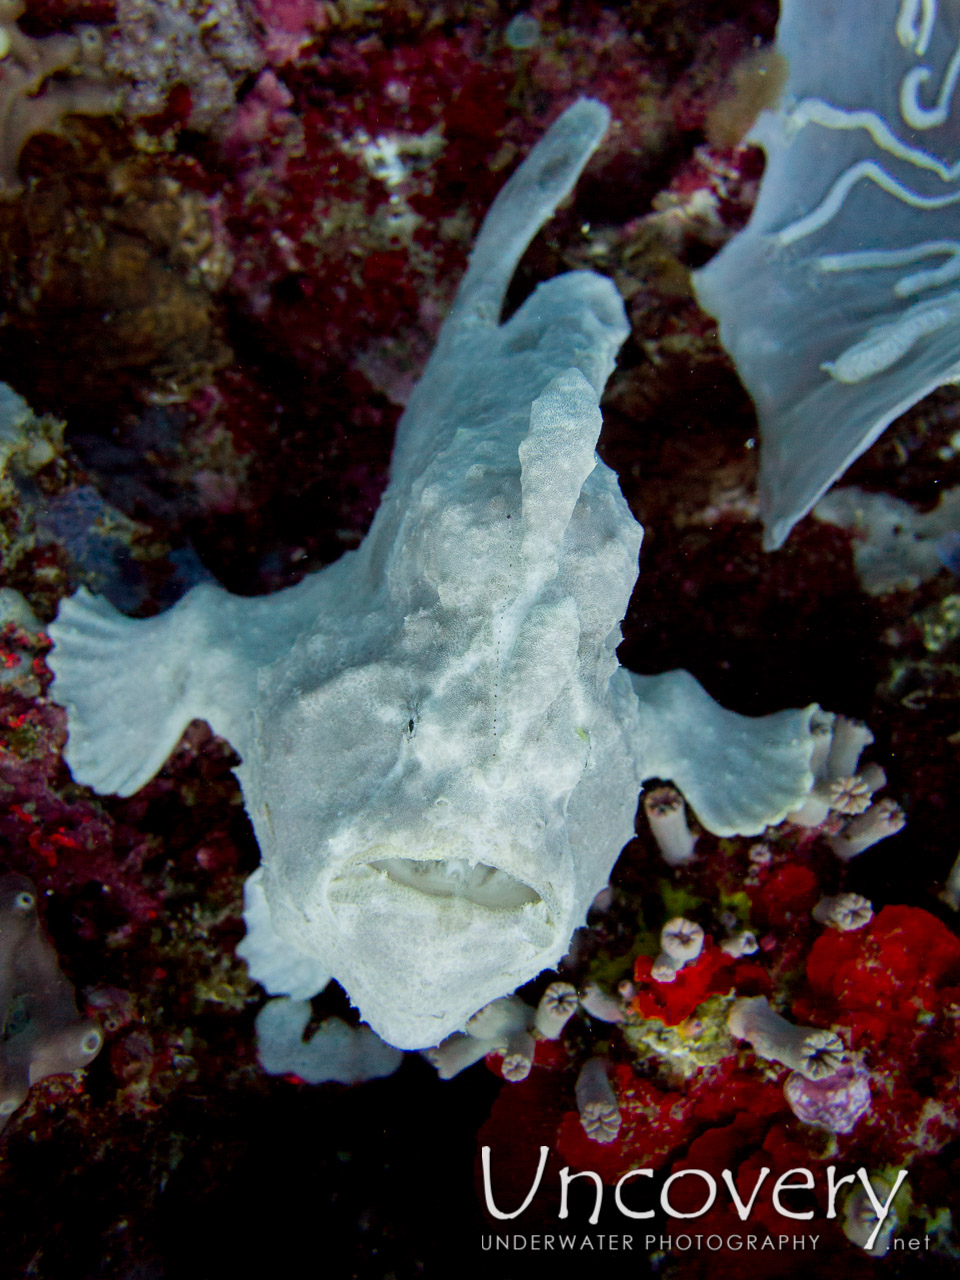 Giant Frogfish (antennarius Commerson), photo taken in Philippines, Bohol, Panglao Island, n/a